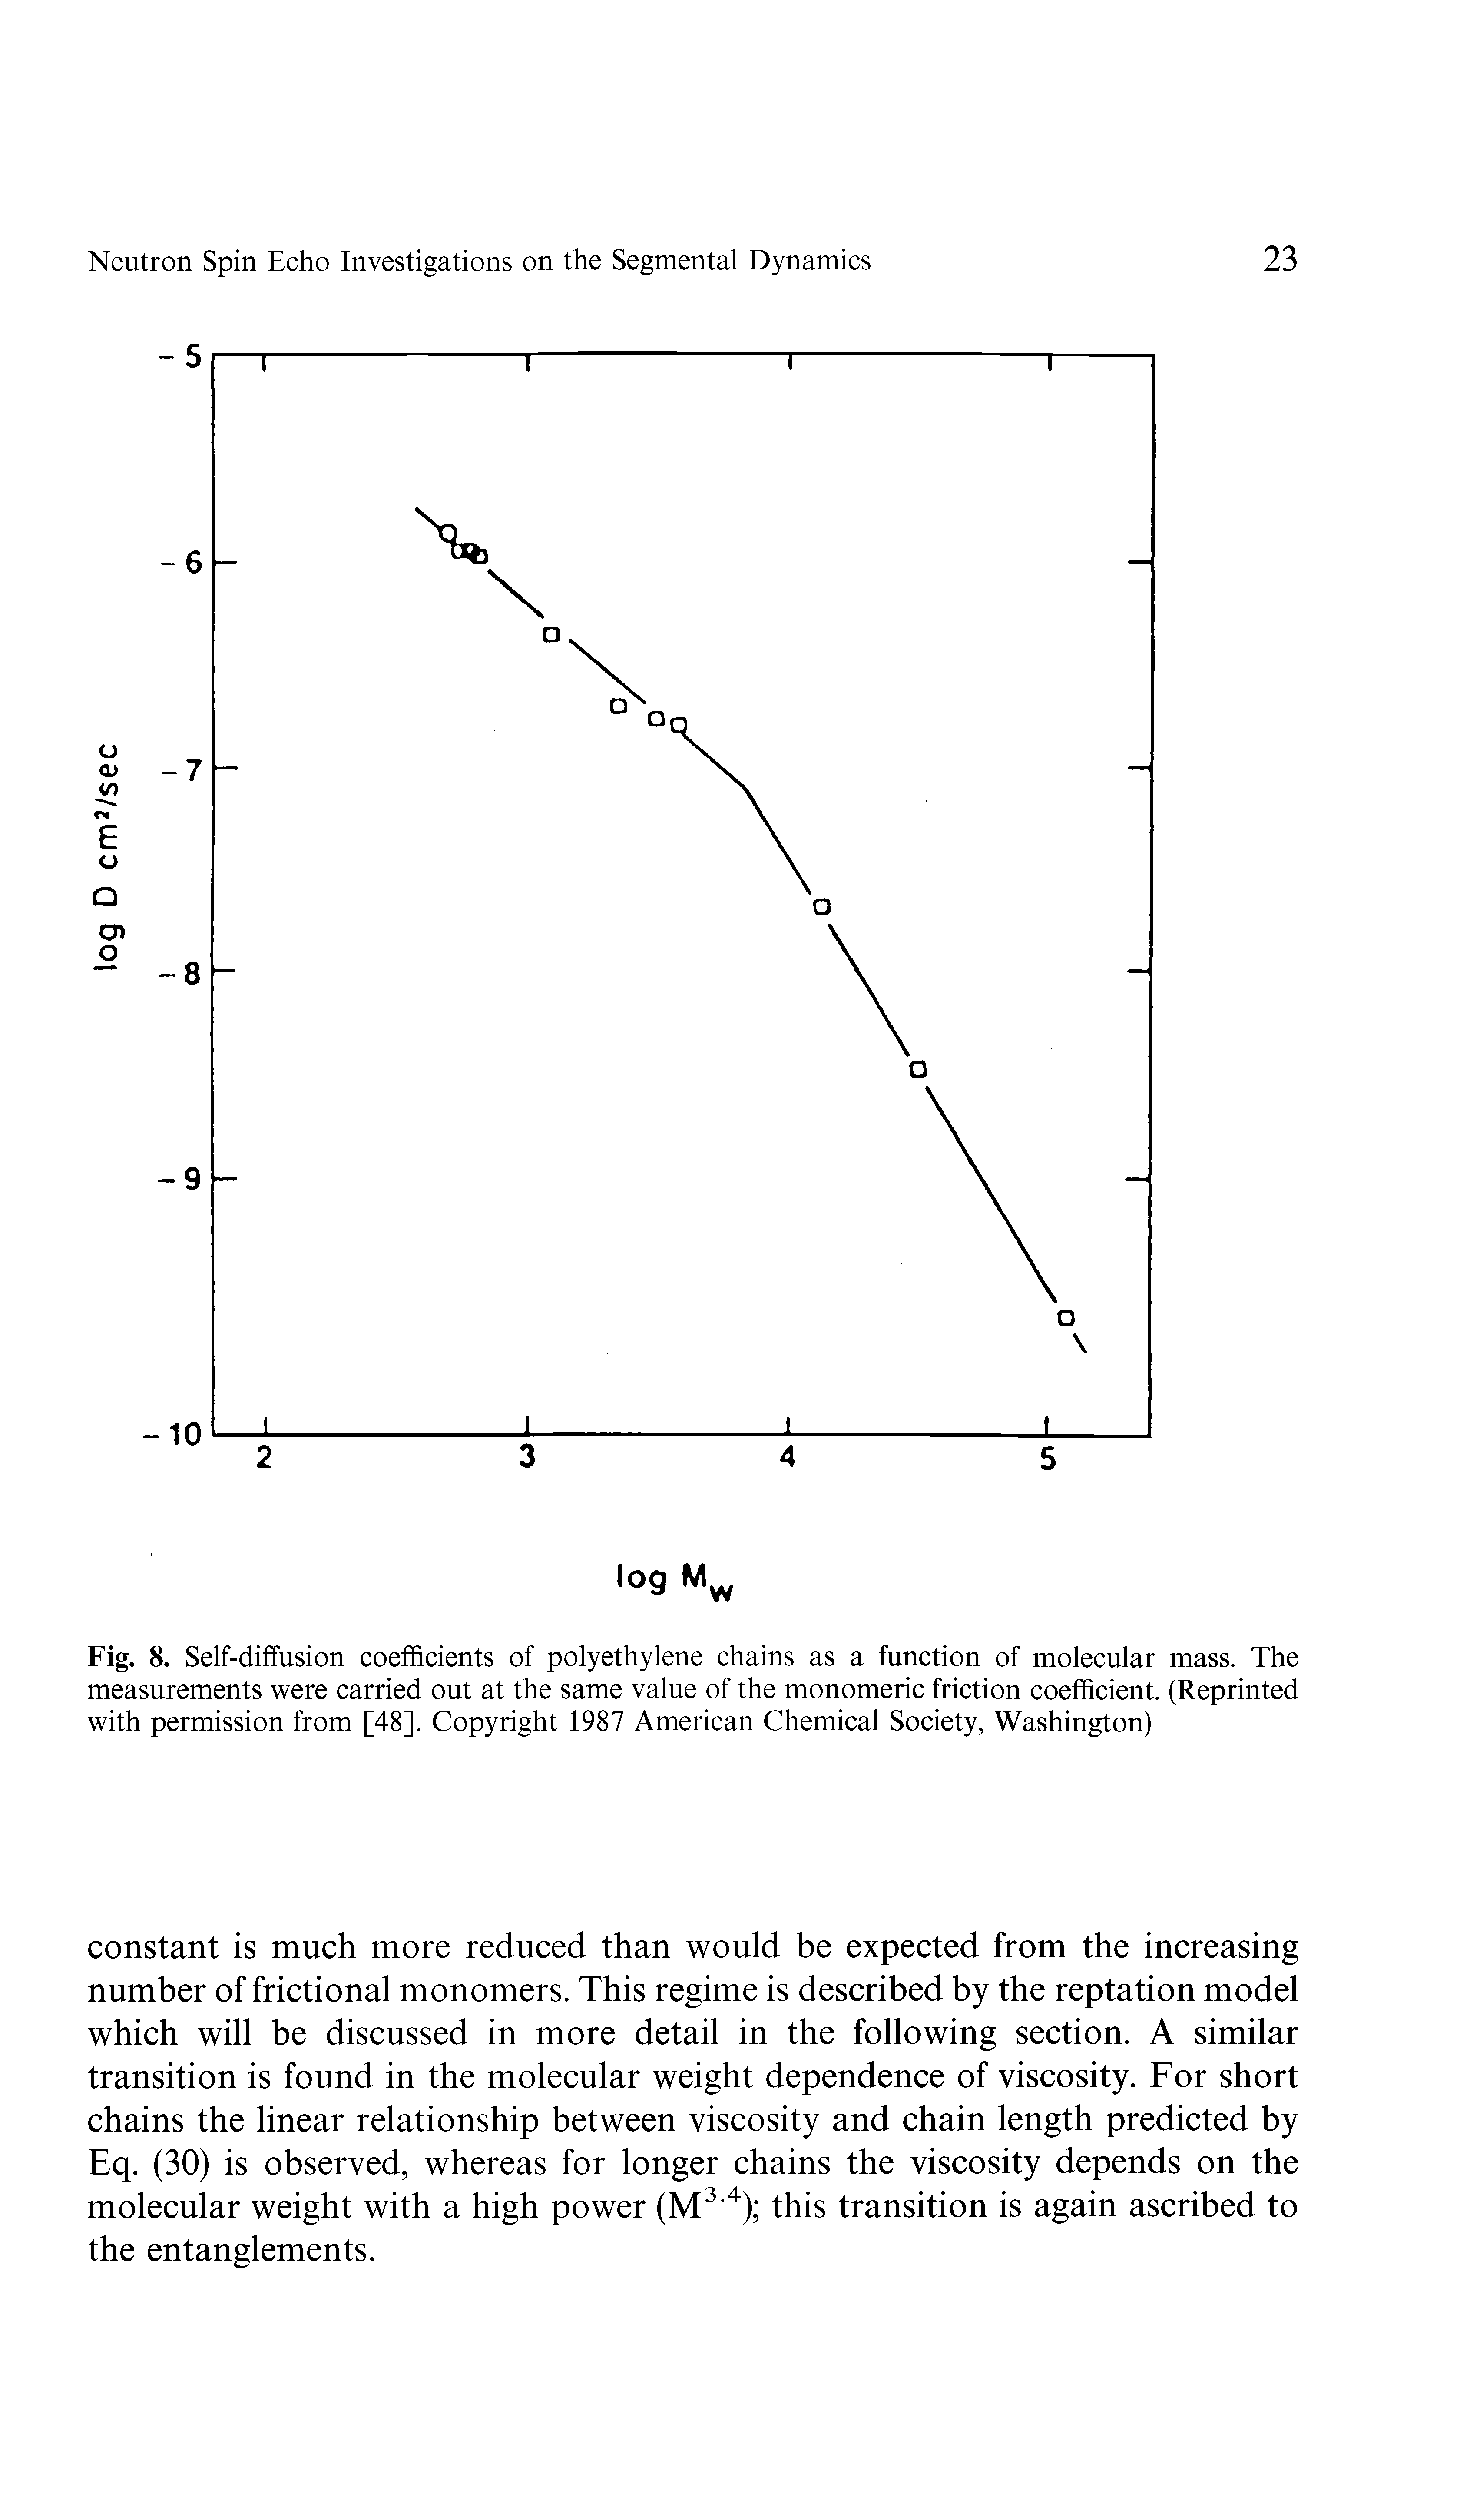 Fig. 8. Self-diffusion coefficients of polyethylene chains as a function of molecular mass. The measurements were carried out at the same value of the monomeric friction coefficient. (Reprinted with permission from [48]. Copyright 1987 American Chemical Society, Washington)...